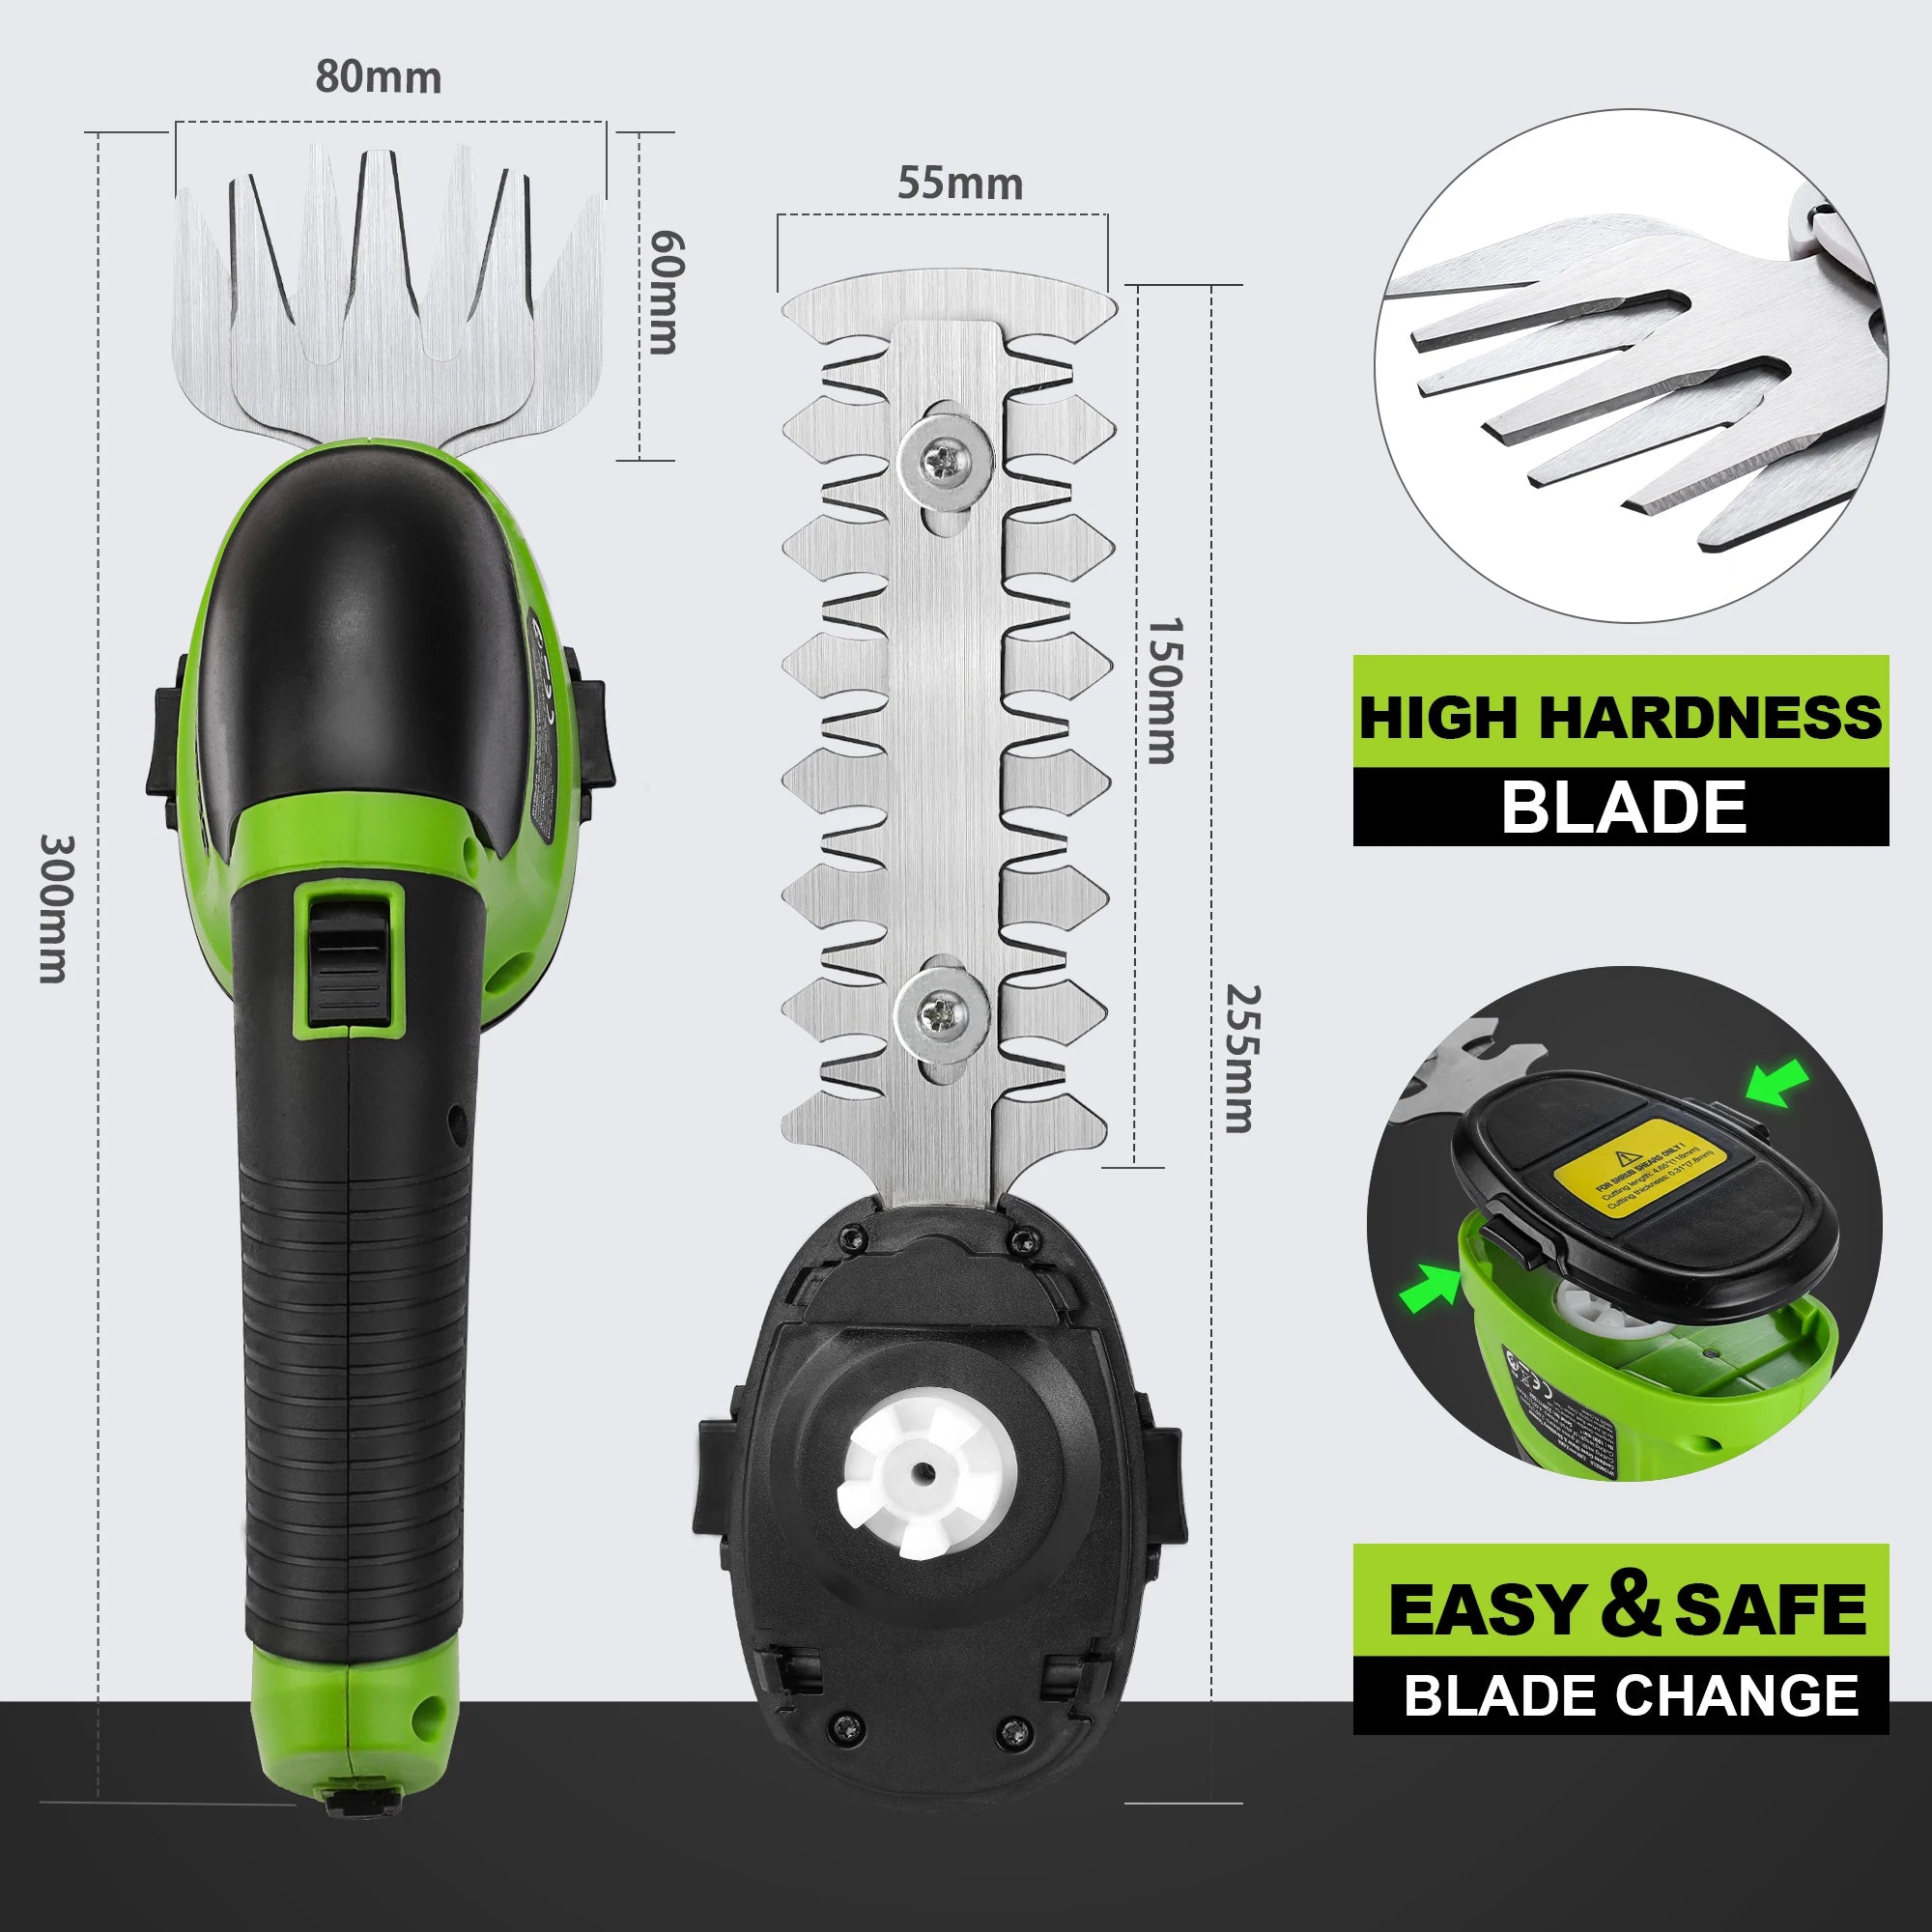 WORKPRO 7.2V/3.6V Hedge Trimmer Electric Trimmer 2 in 1 Cordless Grass Rechargeable Garden Trimmers Tool for Grass Shears Shrub